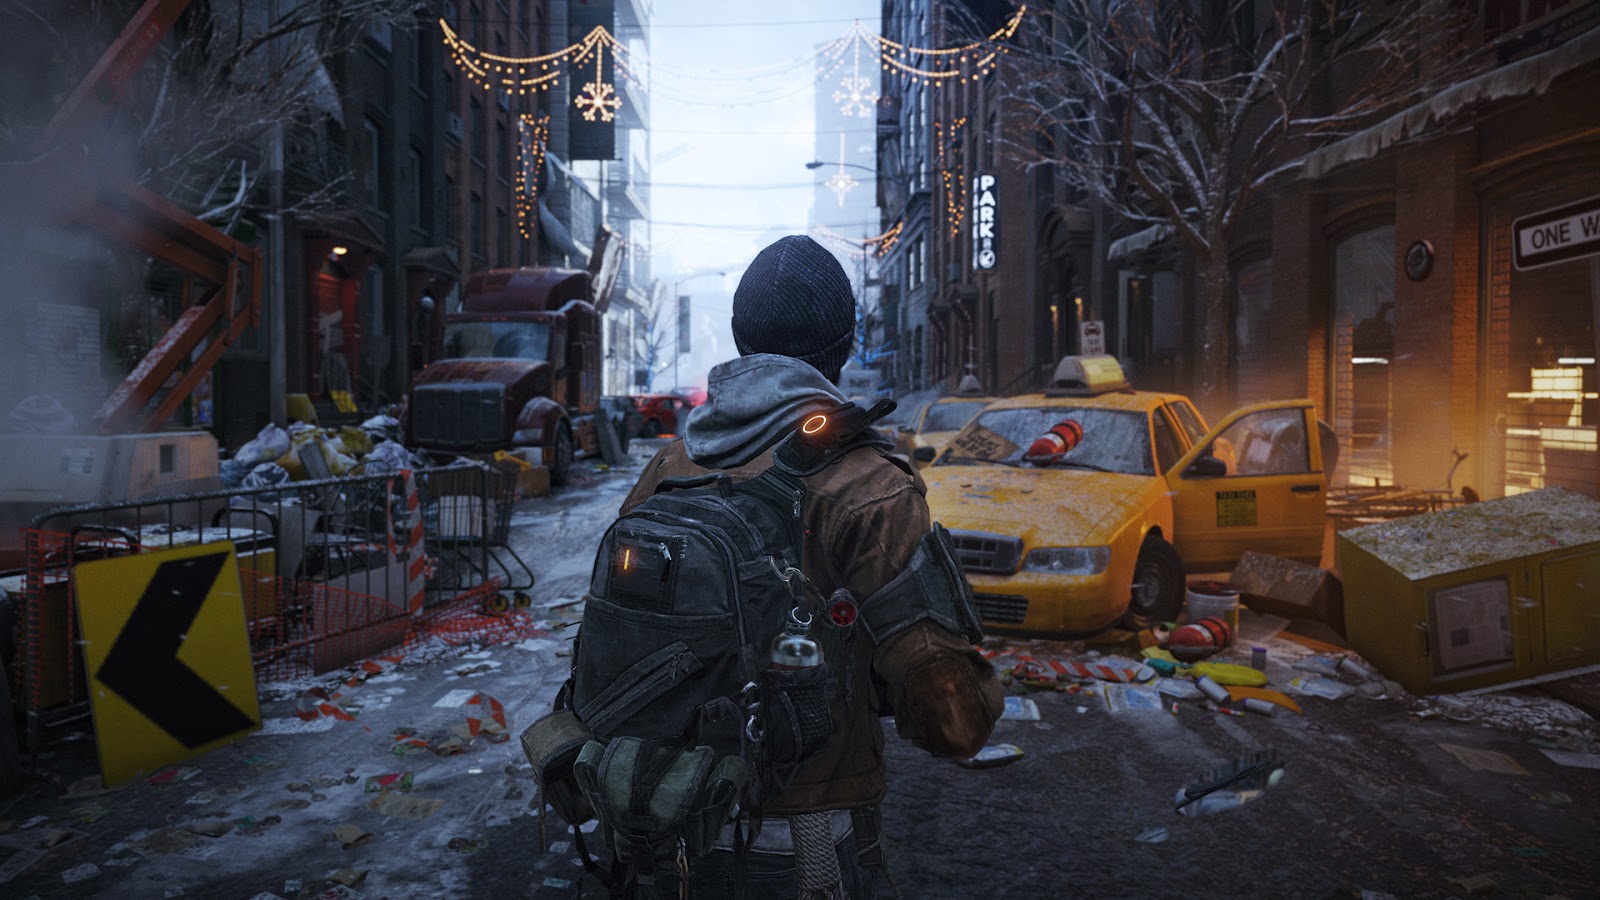 HD Wallpaper From Tom Cy S Splinter Cell The Division Game